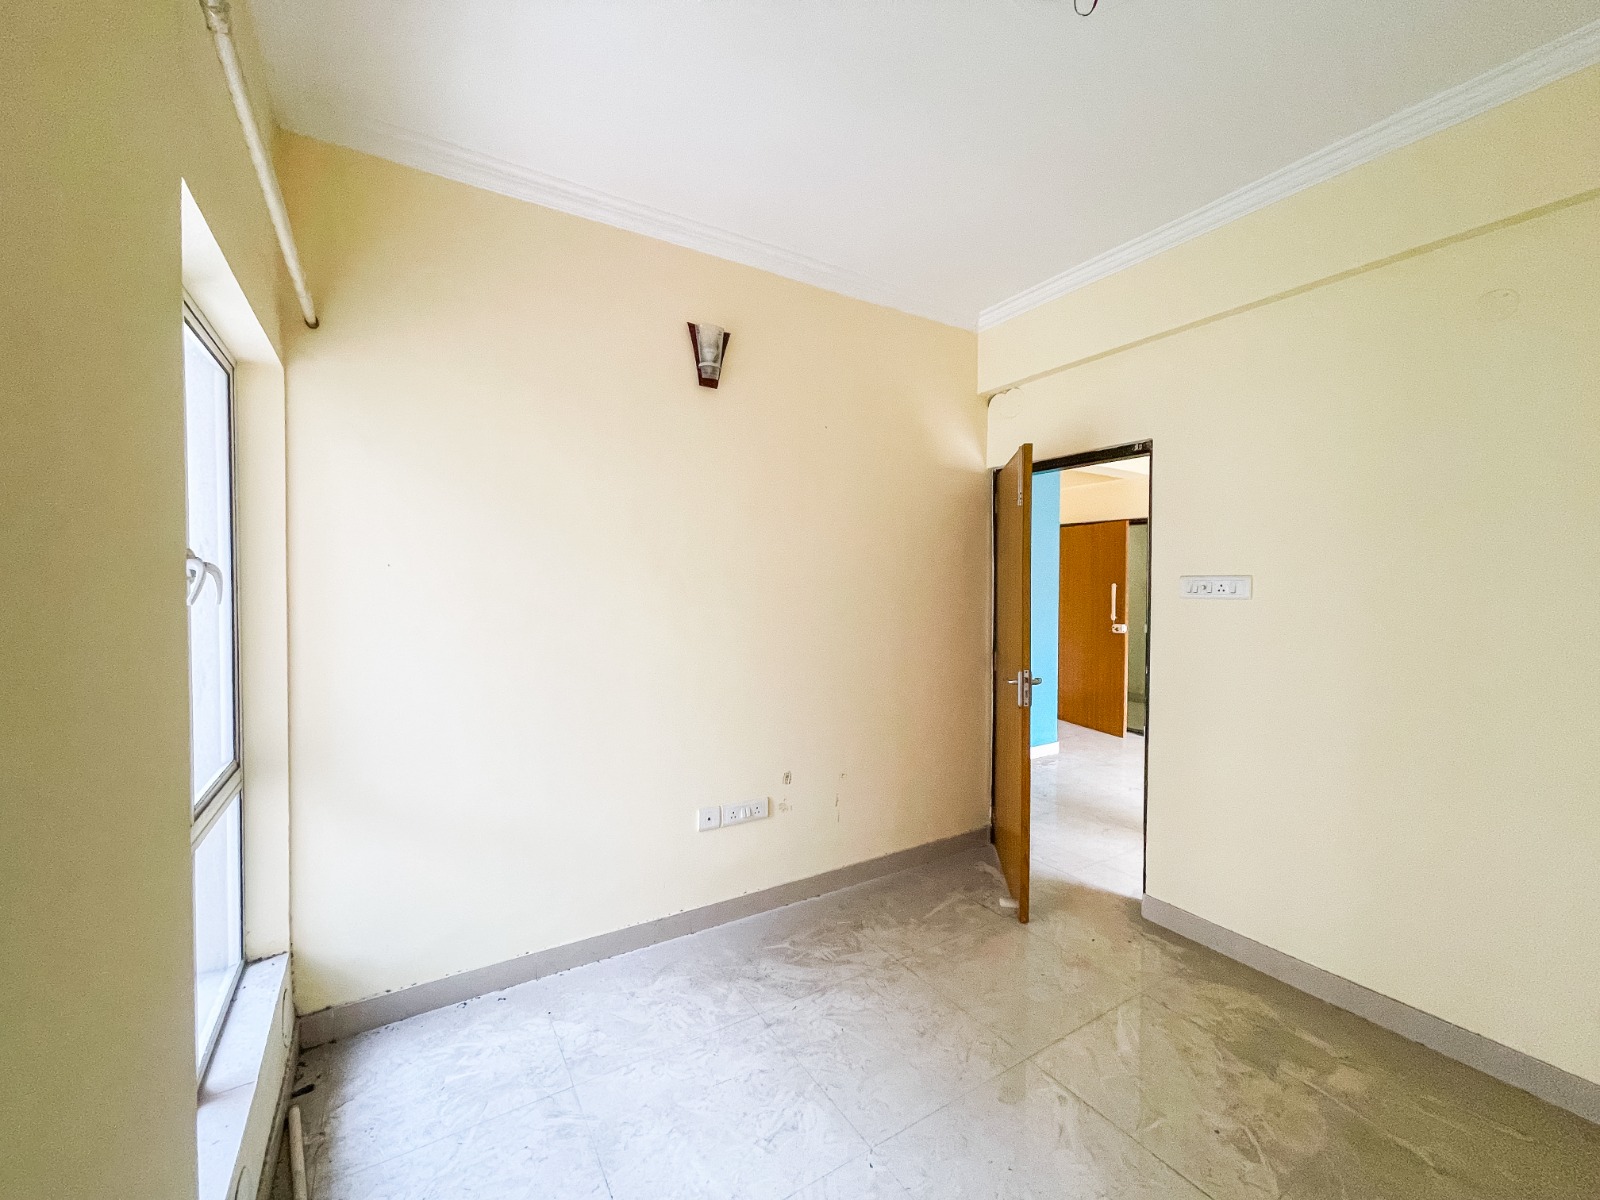 3 BHK Residential Apartment for Rent Only in Tangra